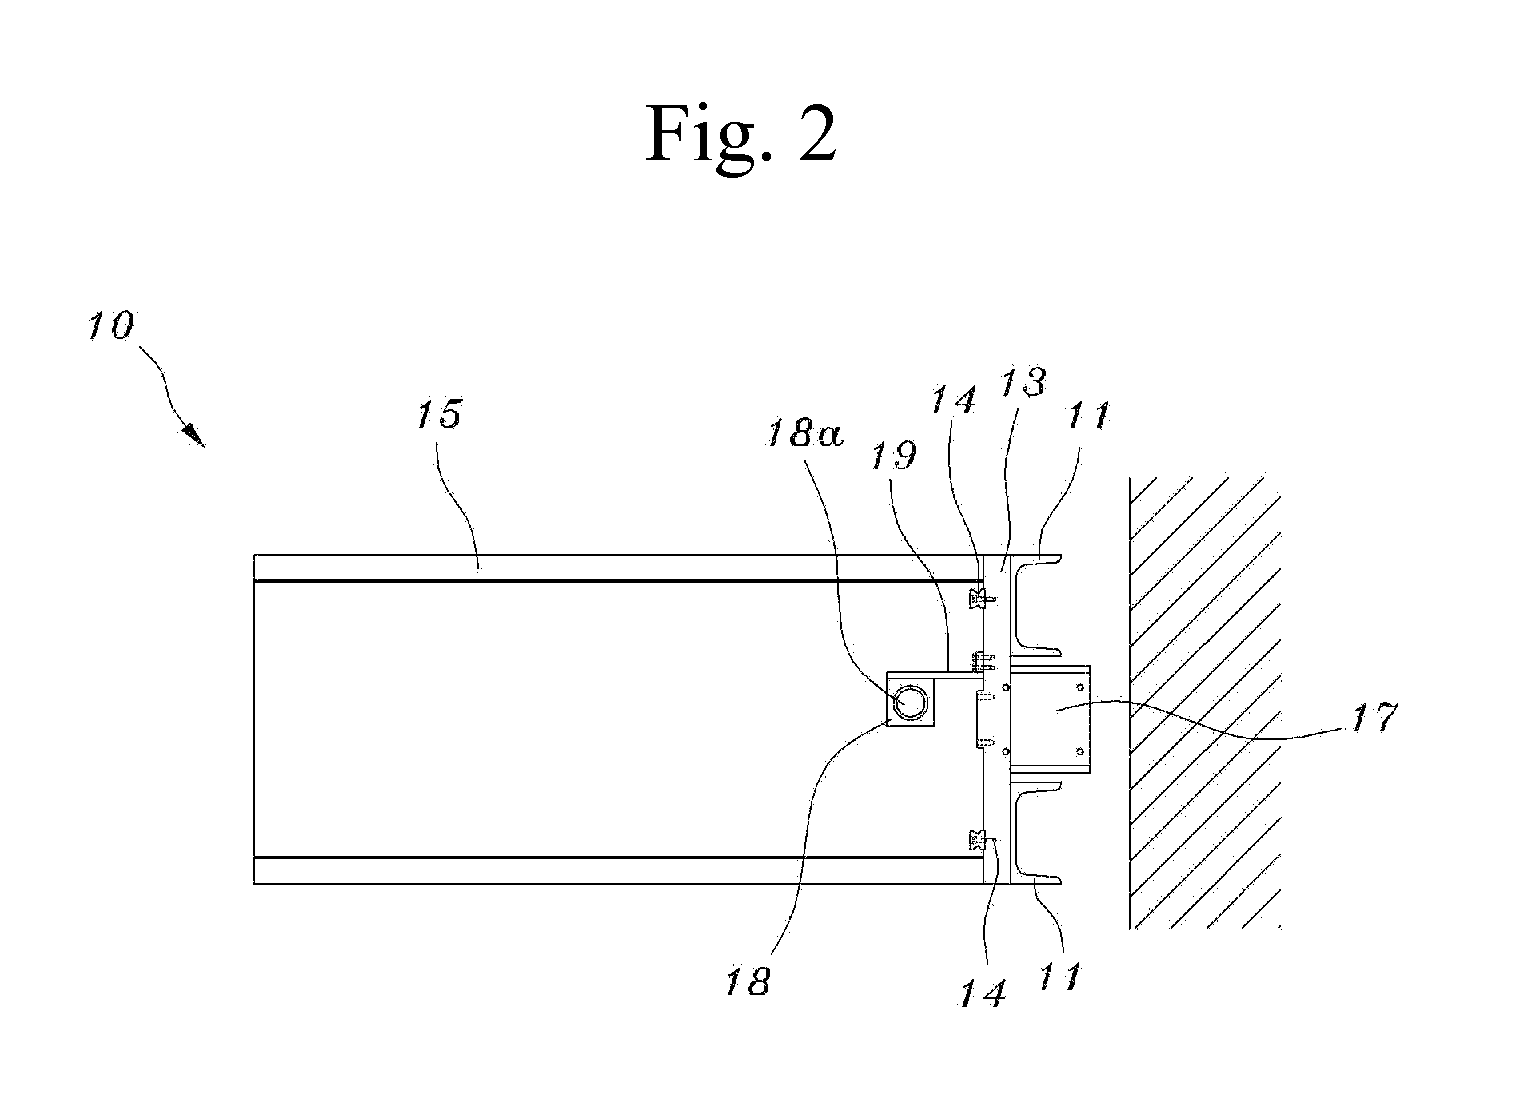 Irradiation device for material test using gamma ray from spent nuclear fuel assembly